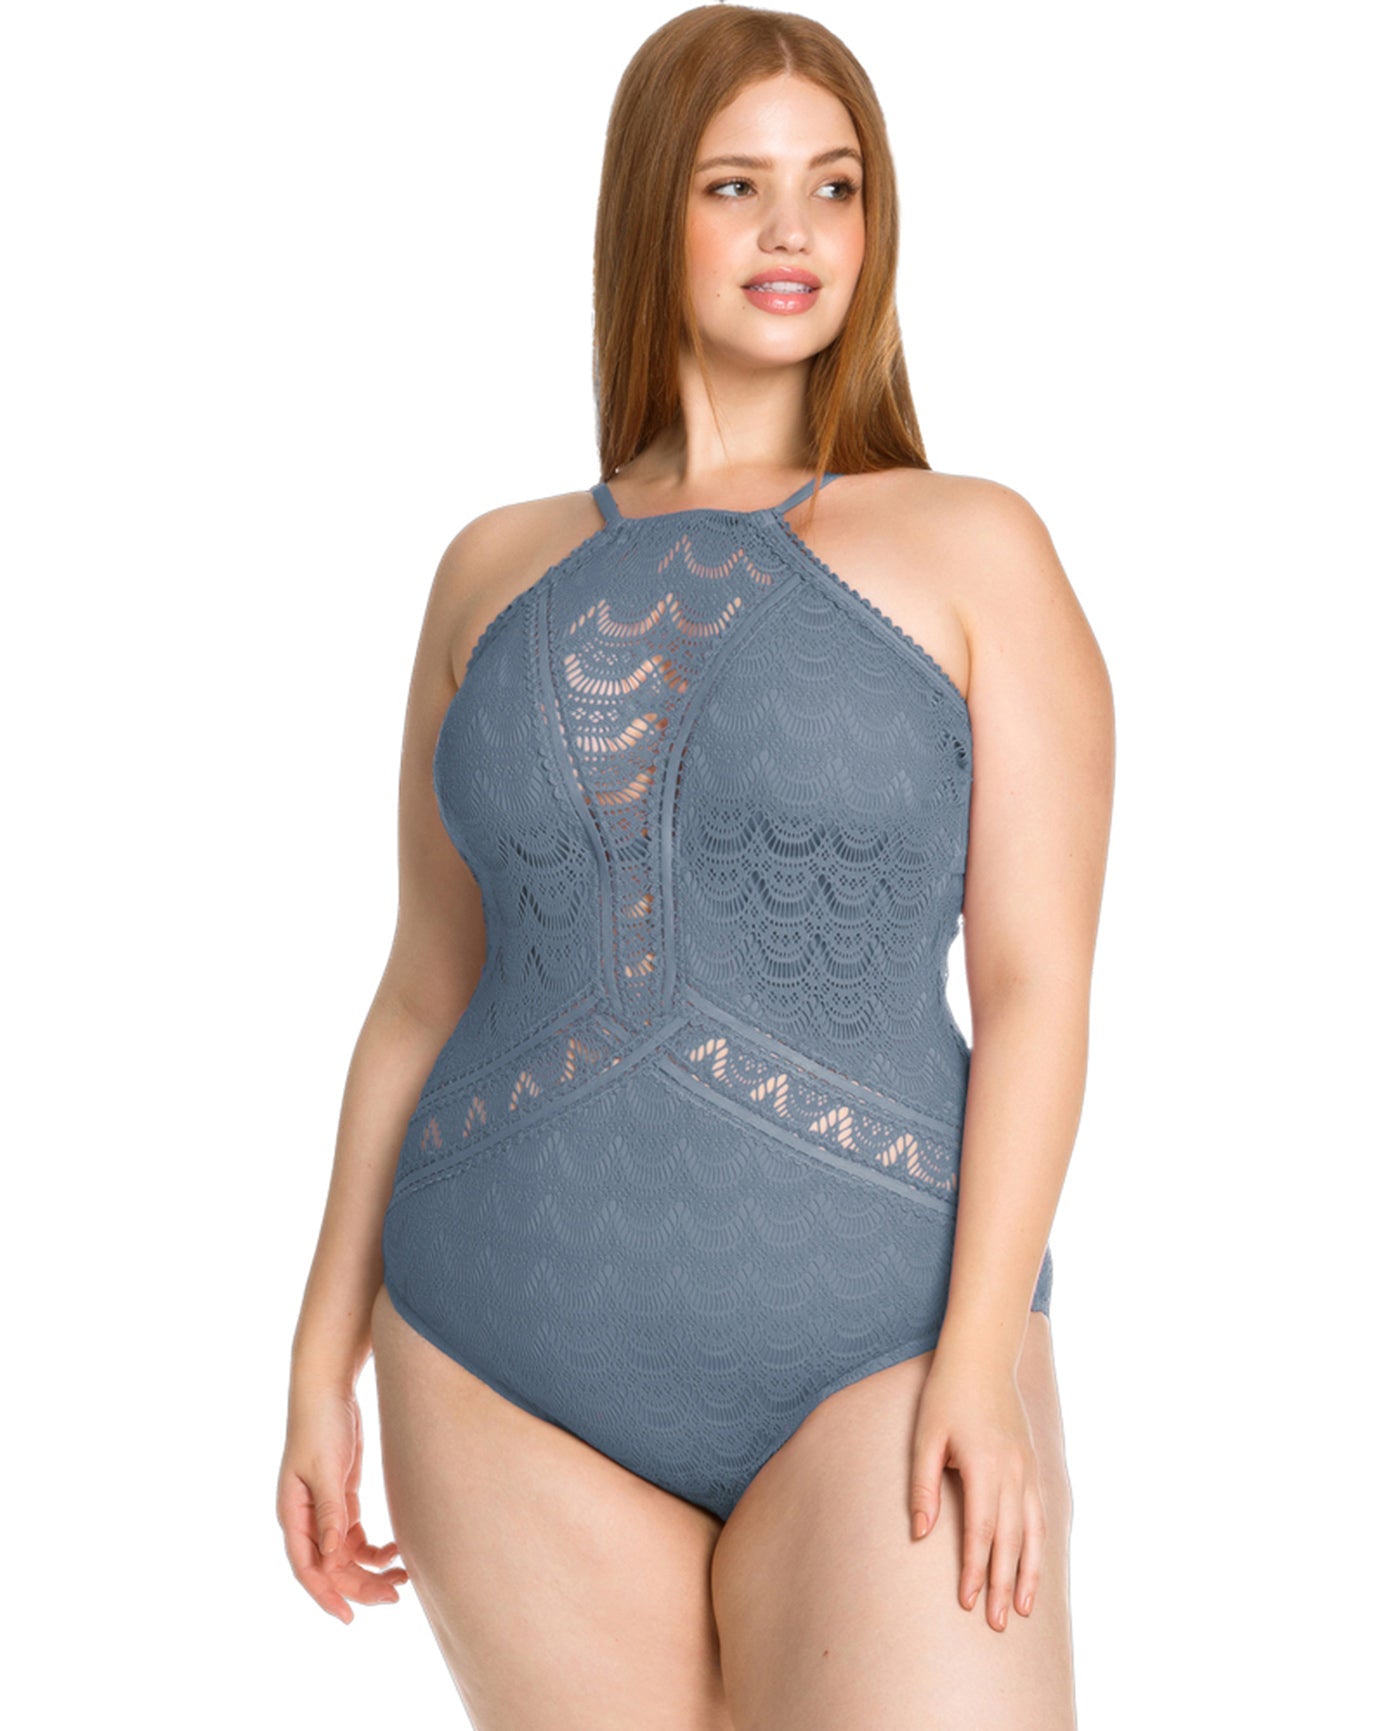 Front View Of Becca ETC by Rebecca Virtue Color Play Lace High Neck Plus Size One Piece Swimsuit | BEC Color Play Steel